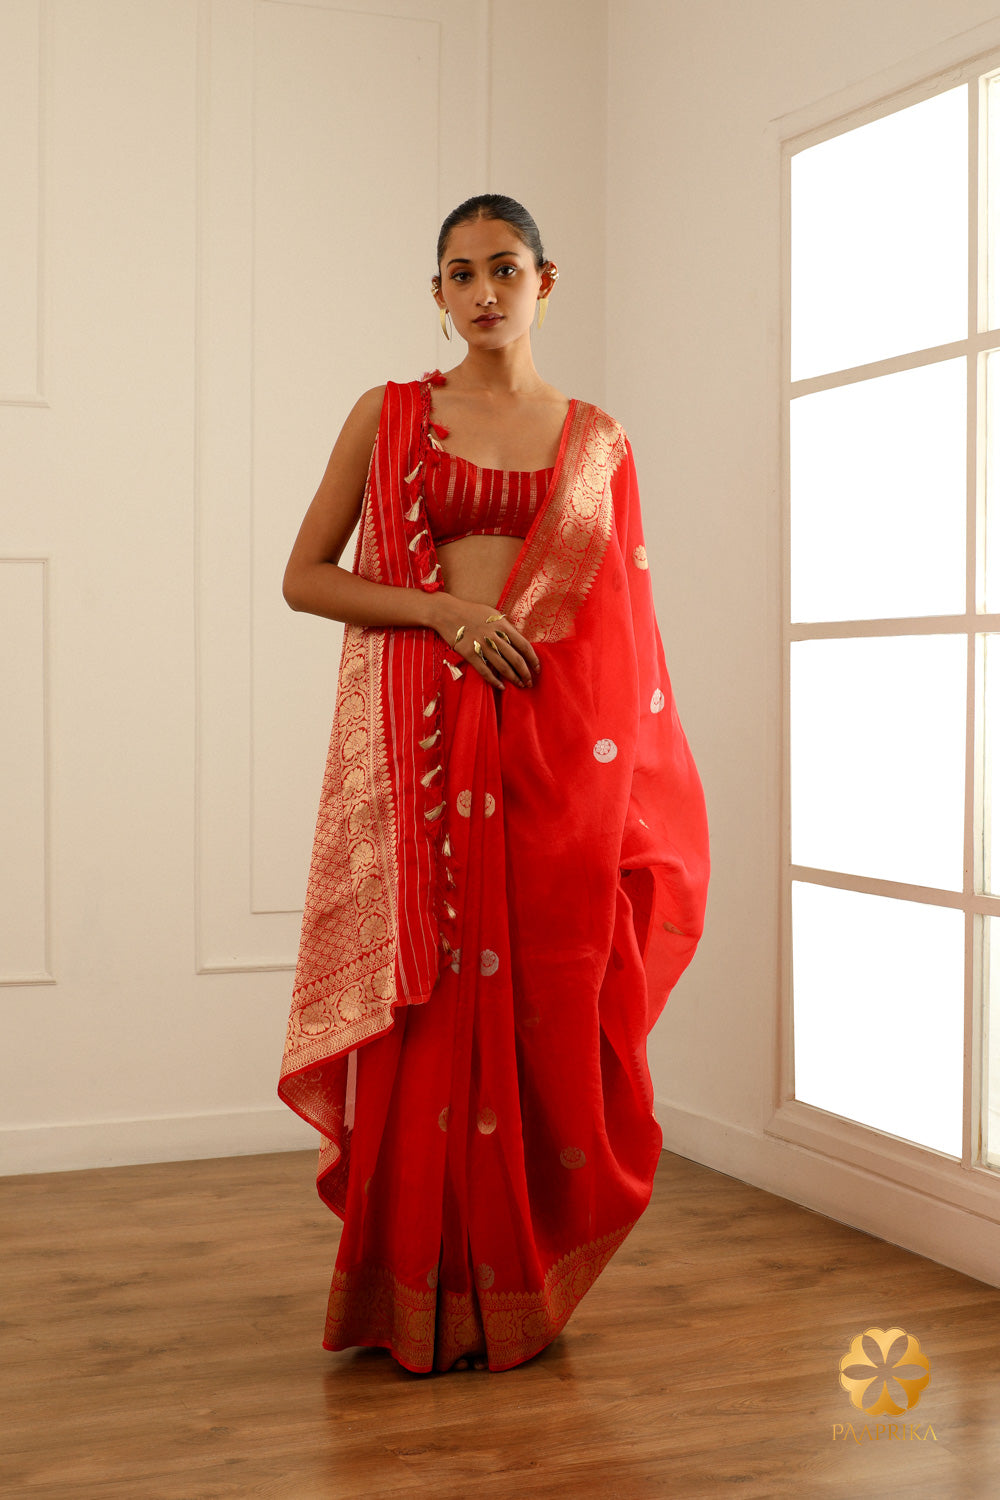  A styled look featuring the saree, perfect for weddings, grand celebrations, or special events.